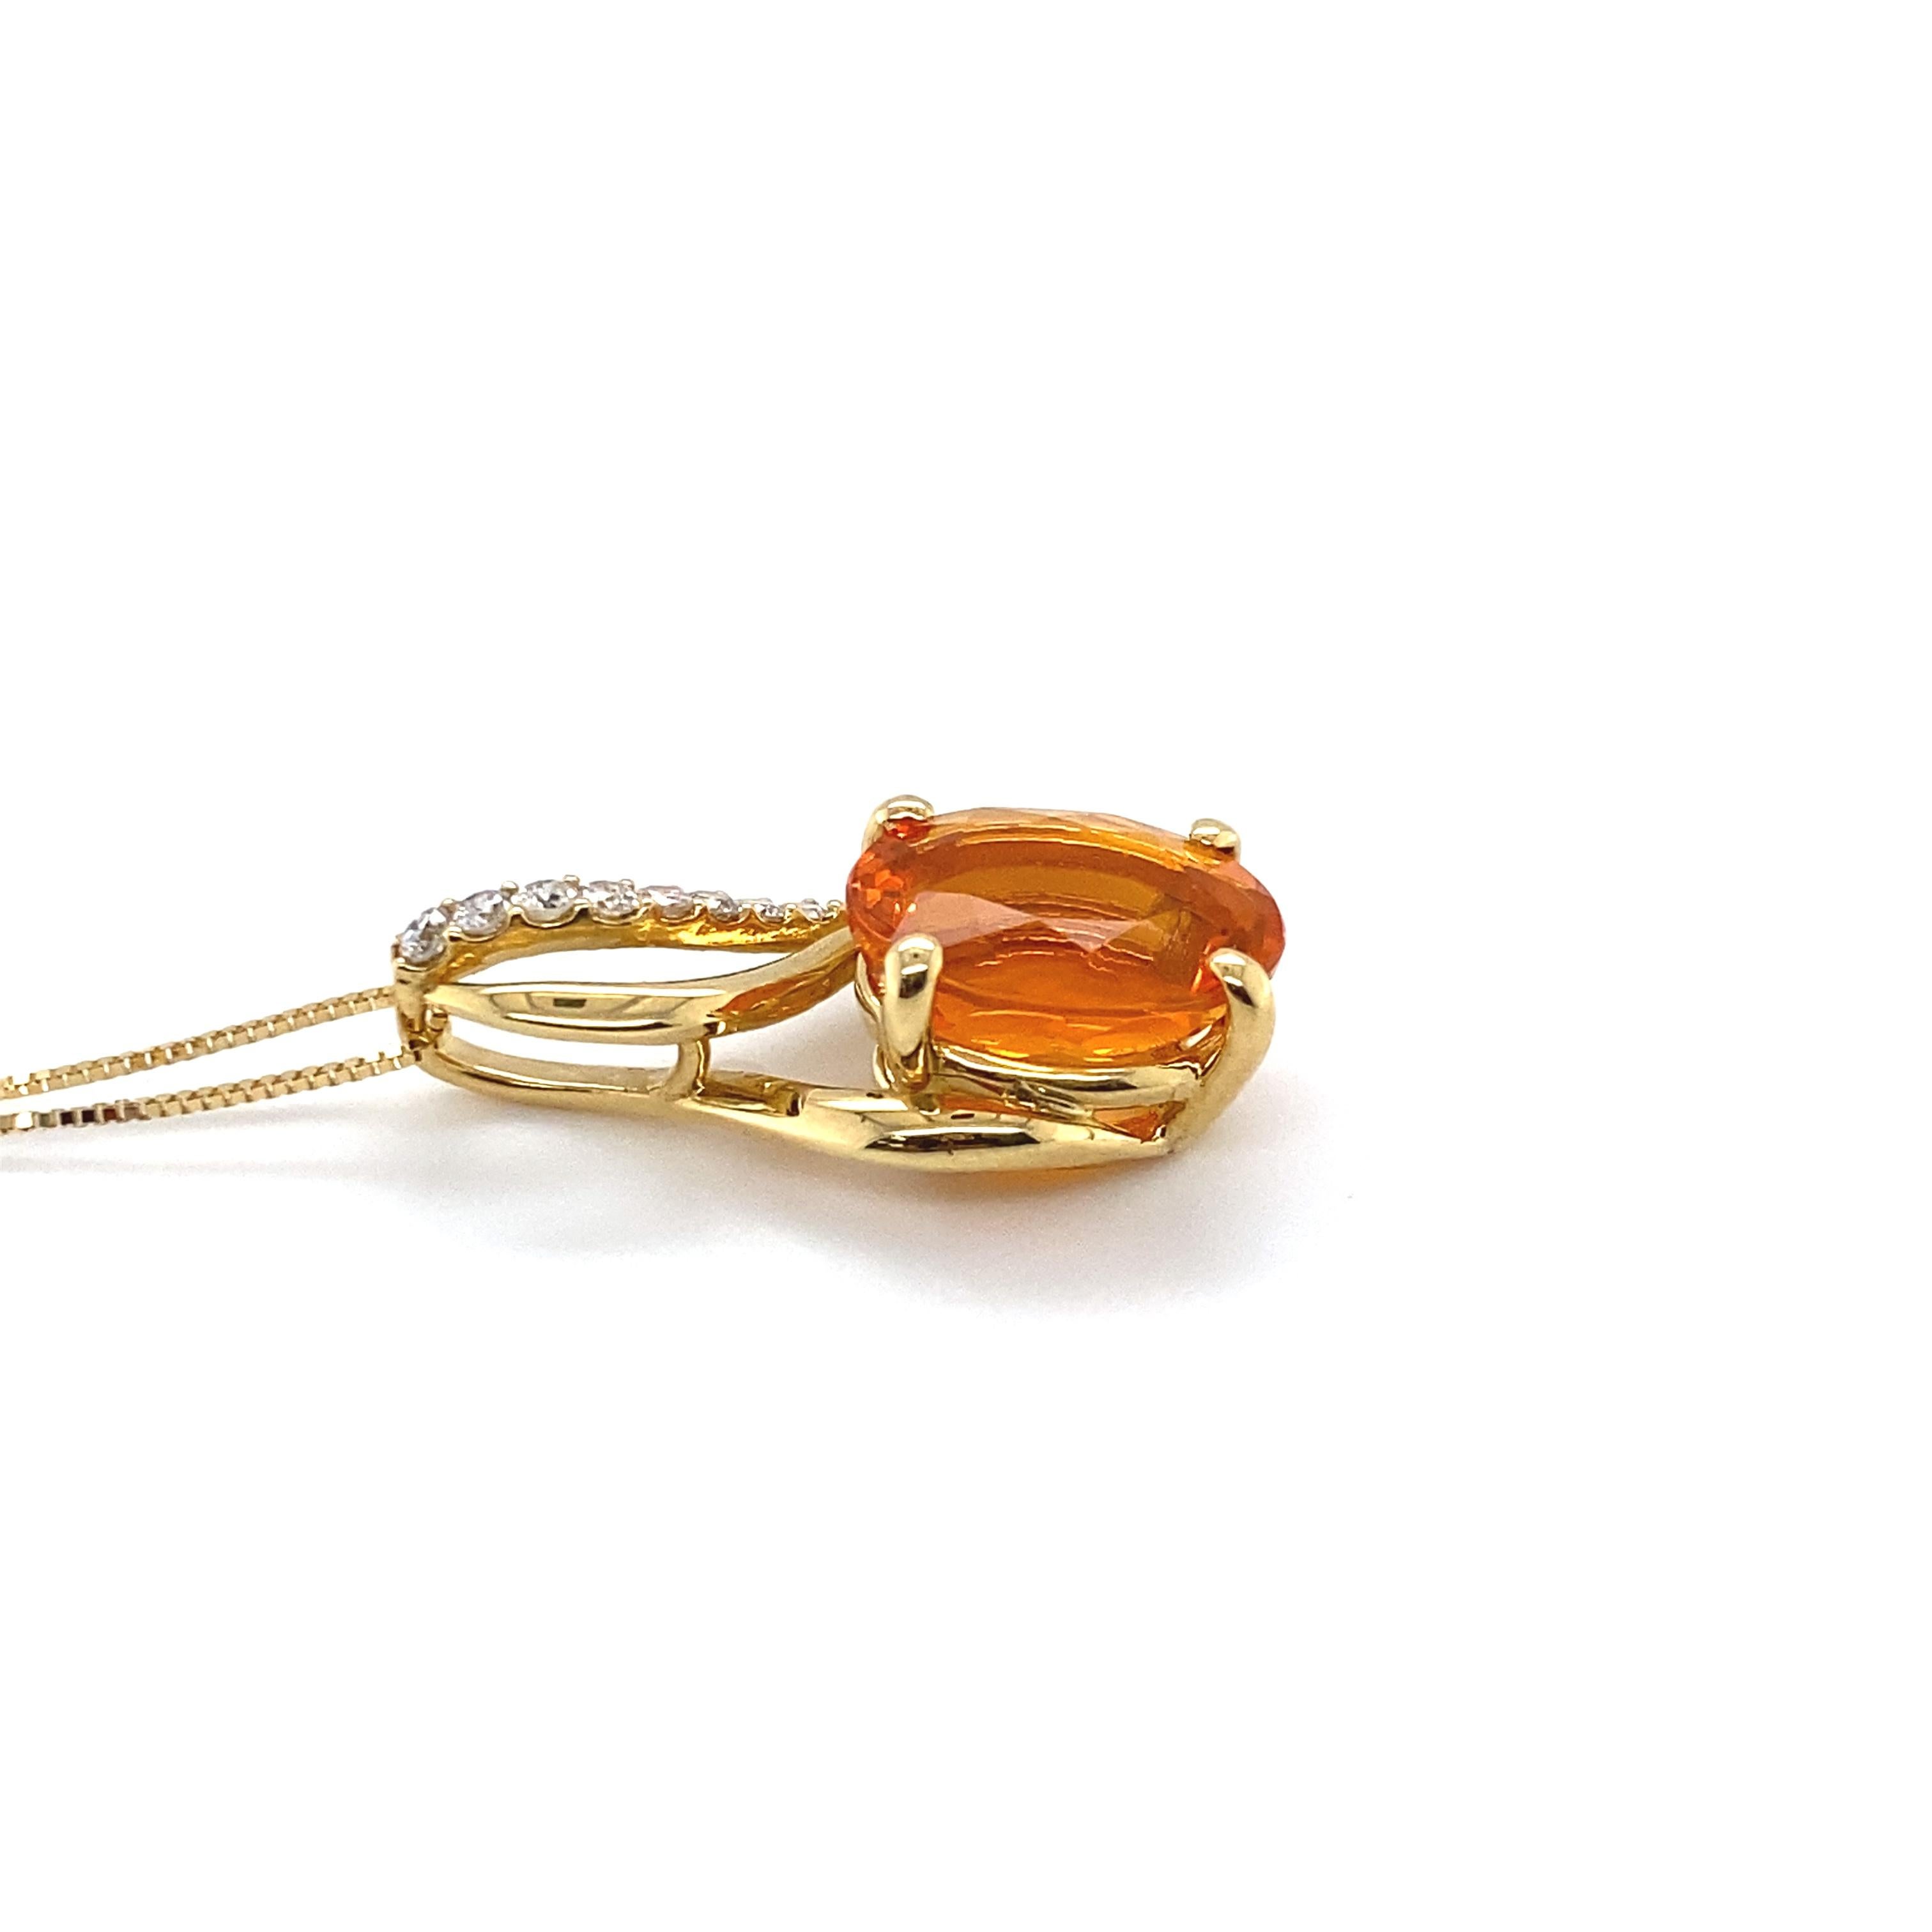 Oval Cut 2.35 Carat Natural Faceted Fire Opal and Diamond Pendant Set in 18K Yellow Gold For Sale